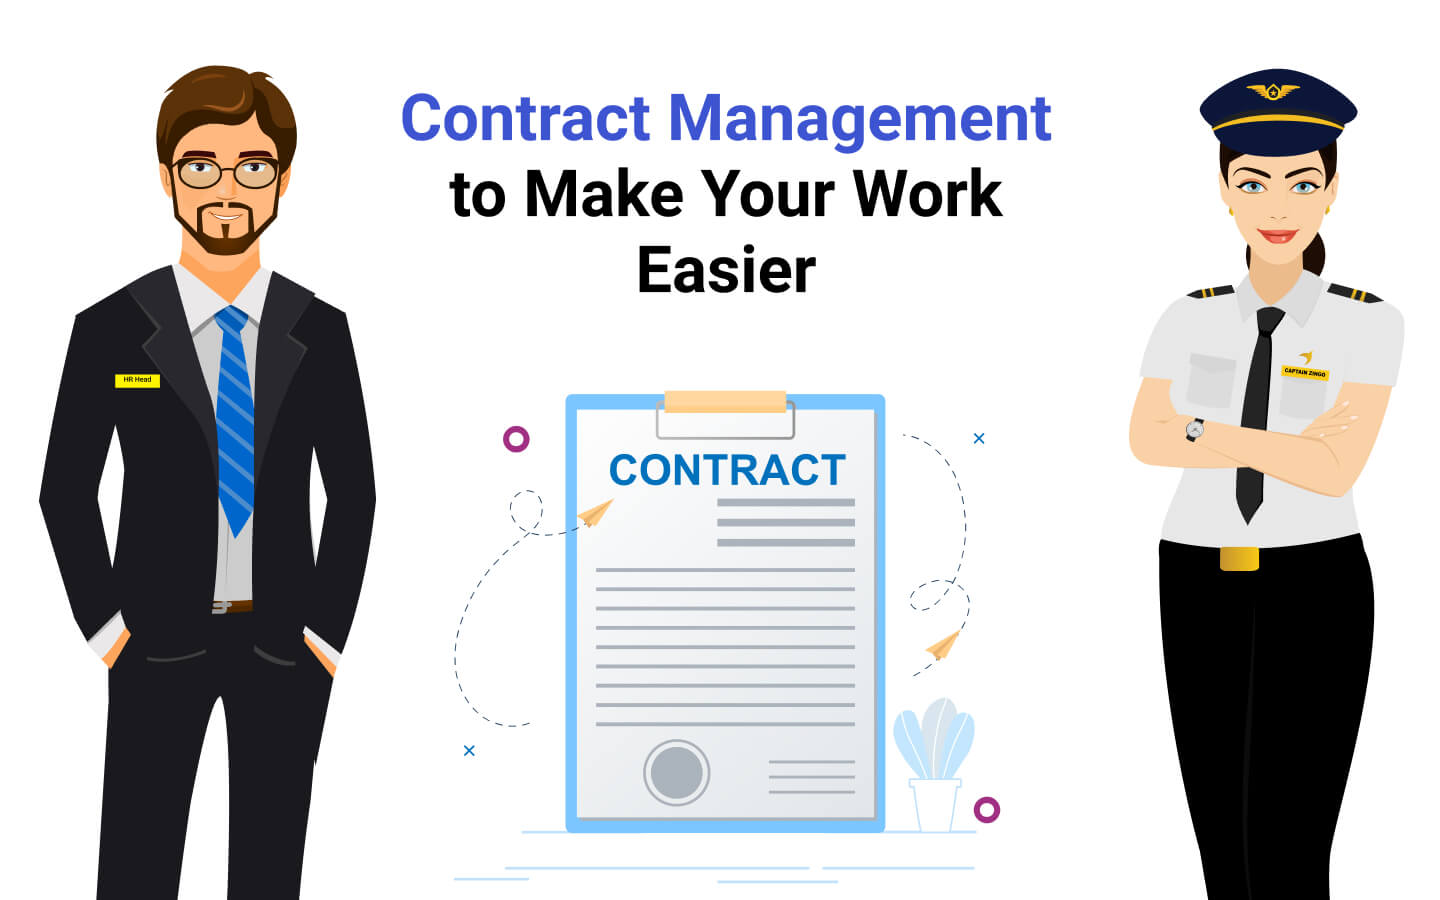 Contract Management to Make Your Work Easier